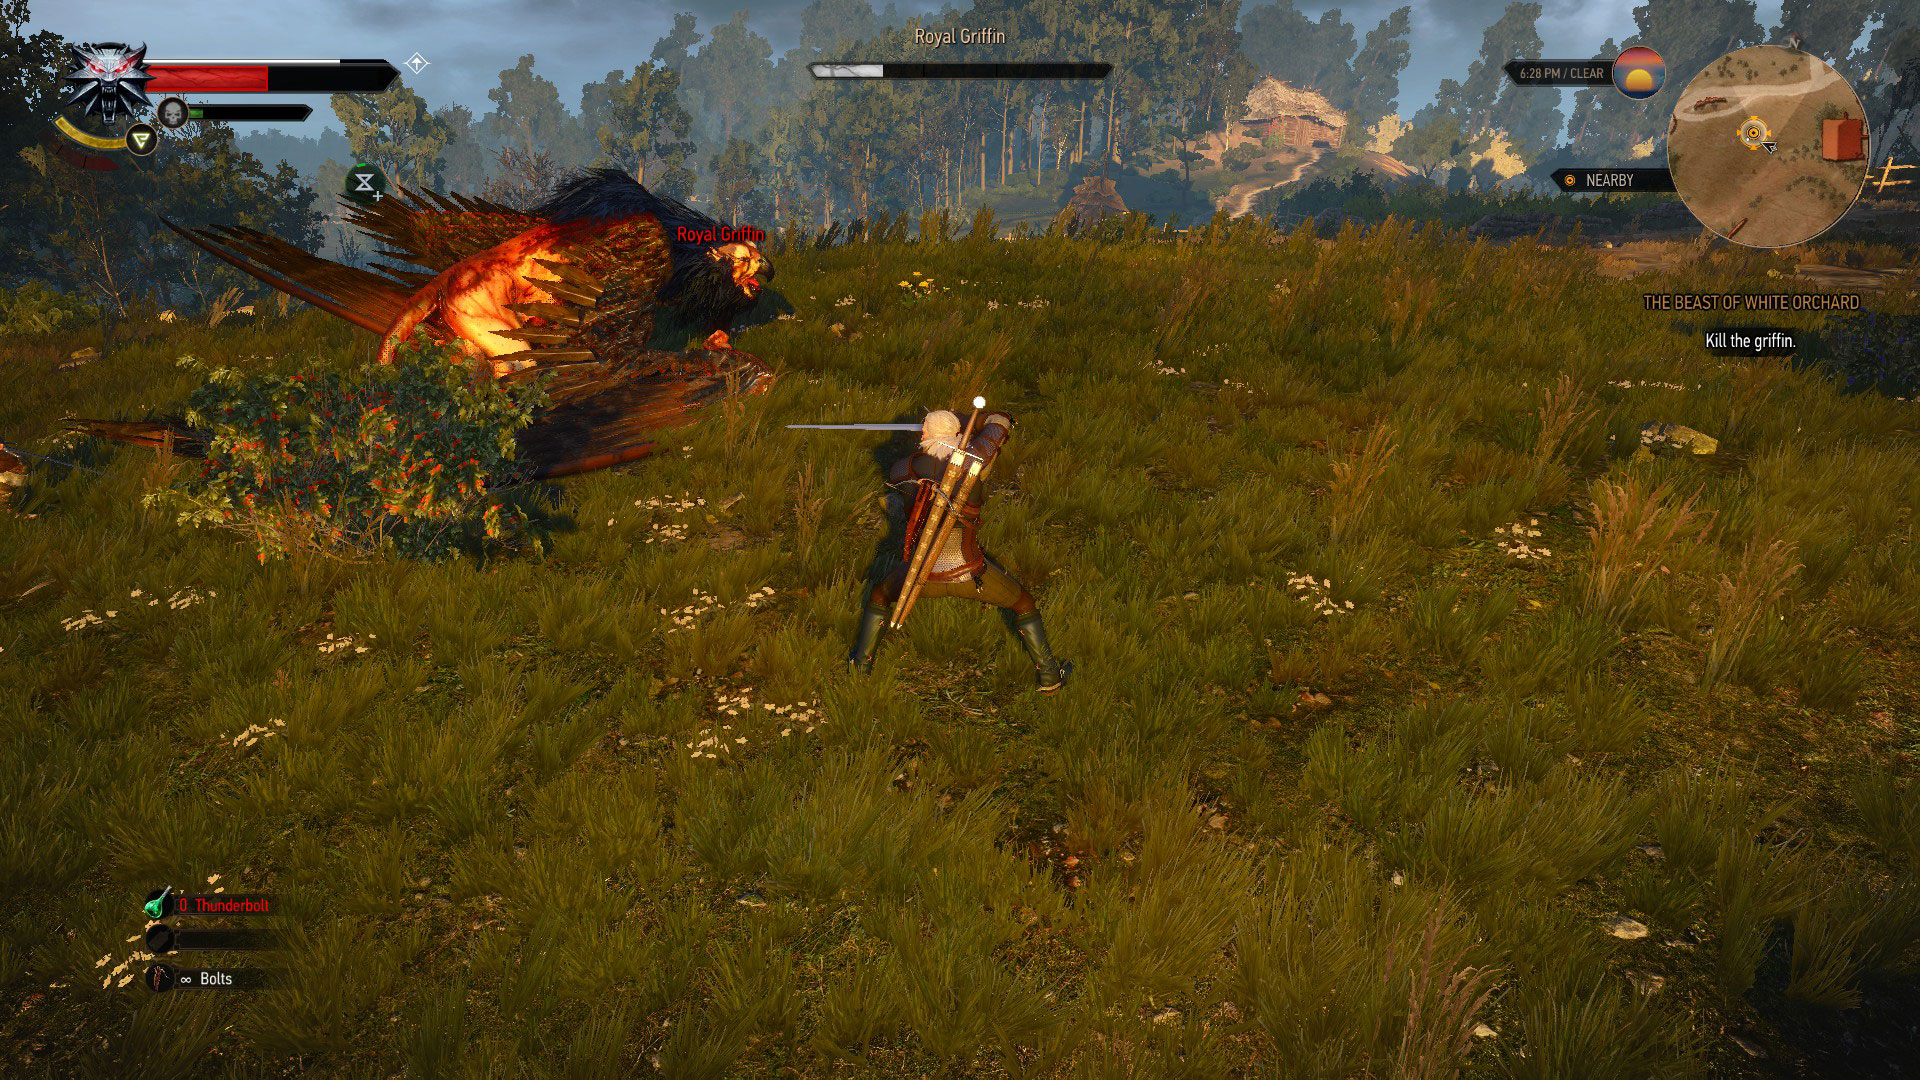 Geralt Vs The Beast Fo White Orchard